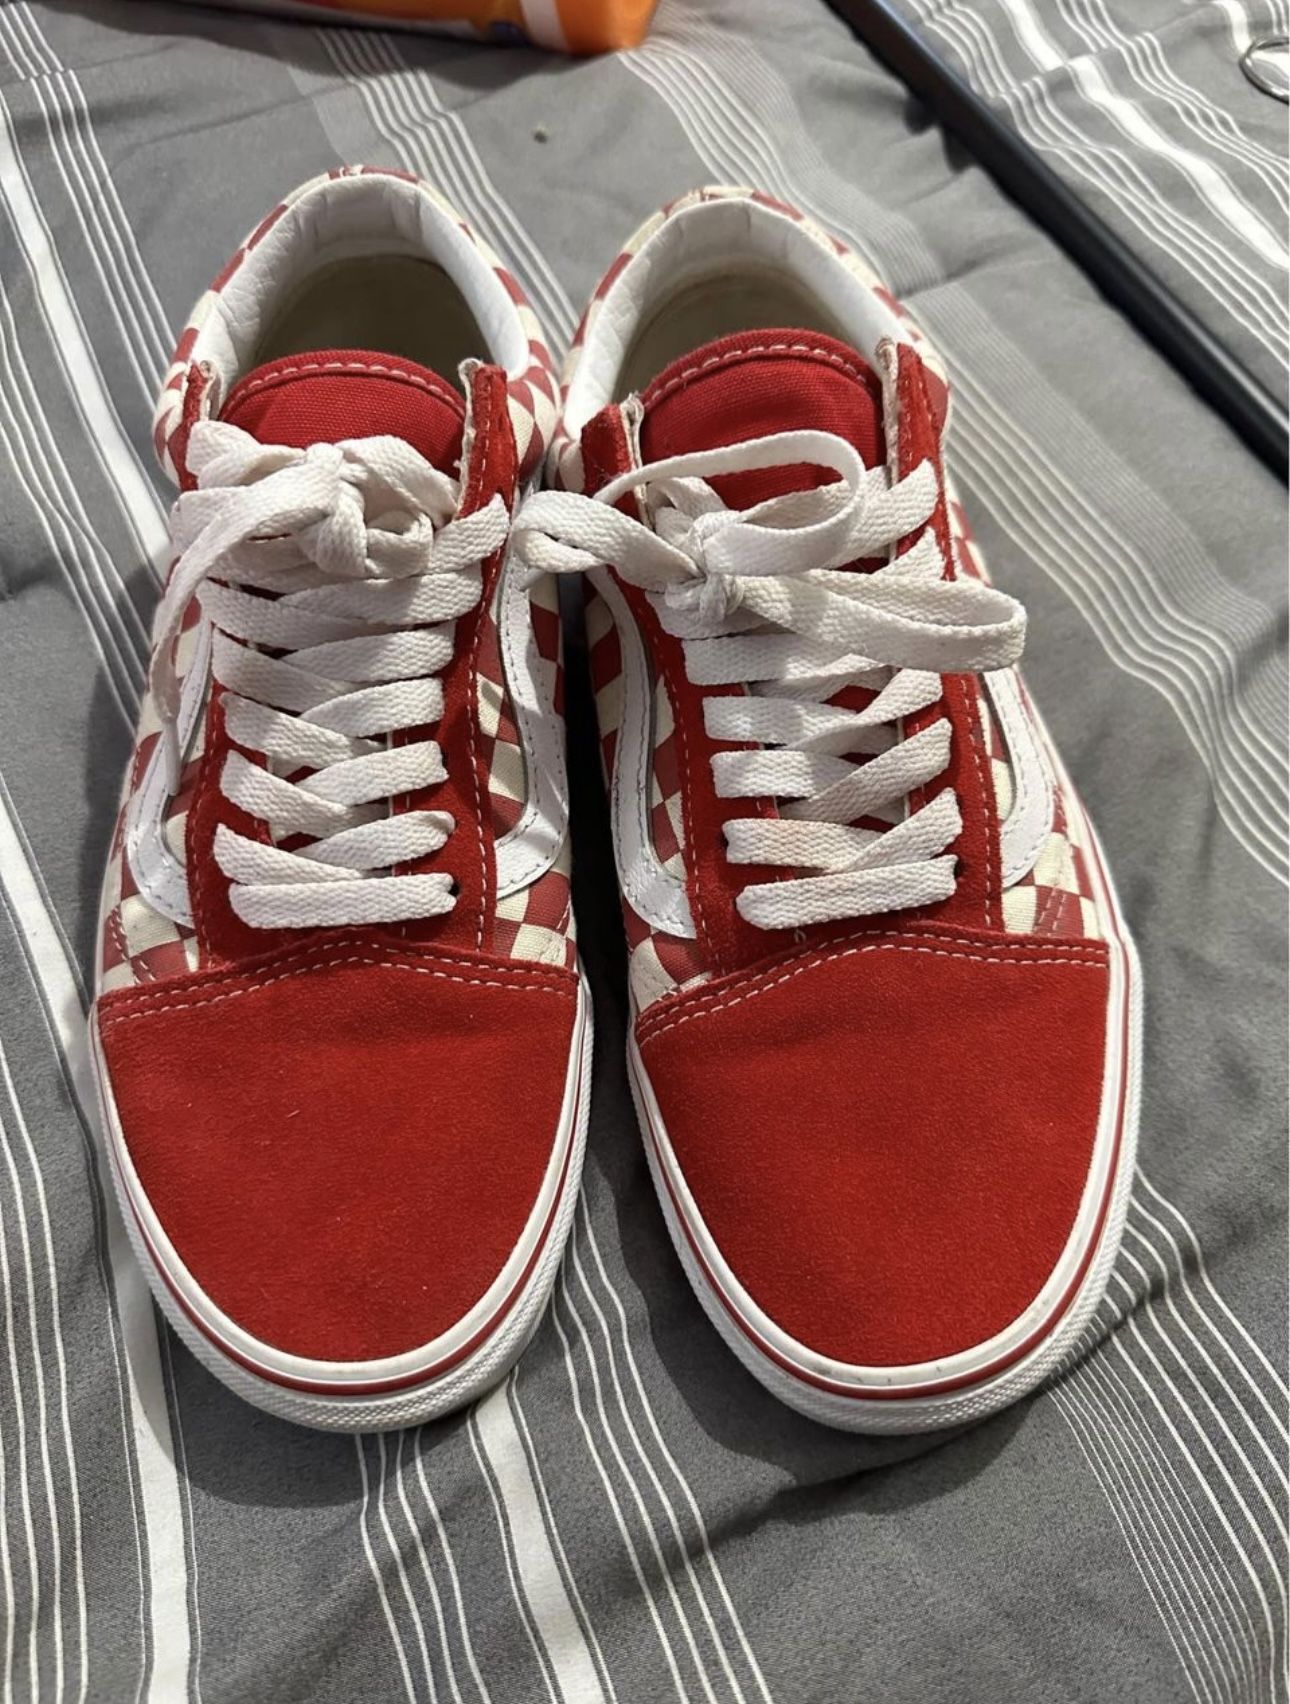 Vans Red Checkered 